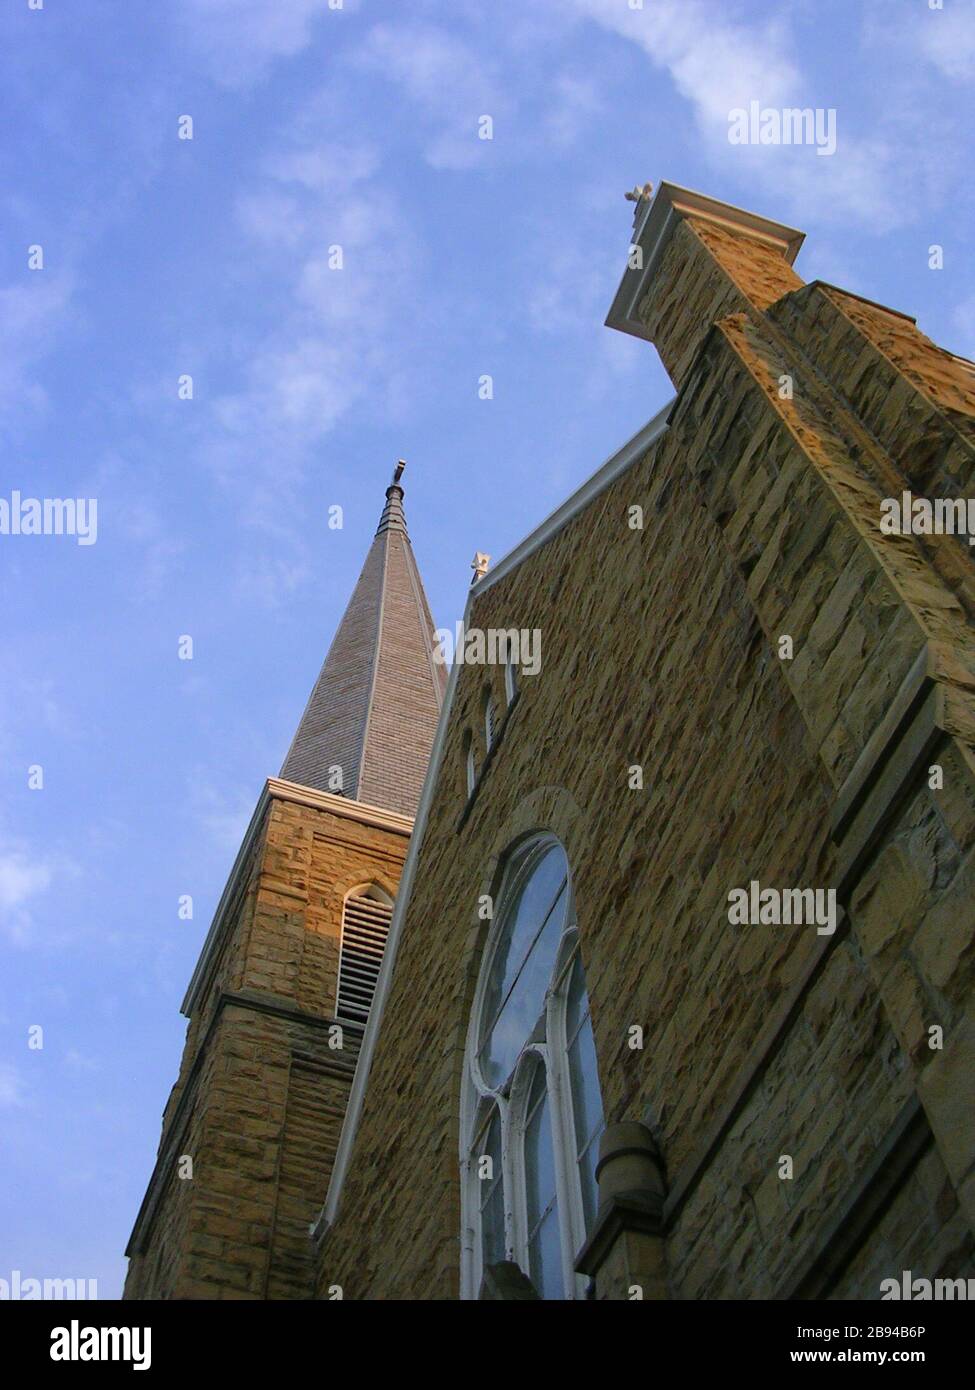 'English: Tower and front ediface of St. Mary Mother of the Redeemer Church.; 8 May 2007 (according to Exif data); Own work by the original uploader; User:Afries52; ' Stock Photo